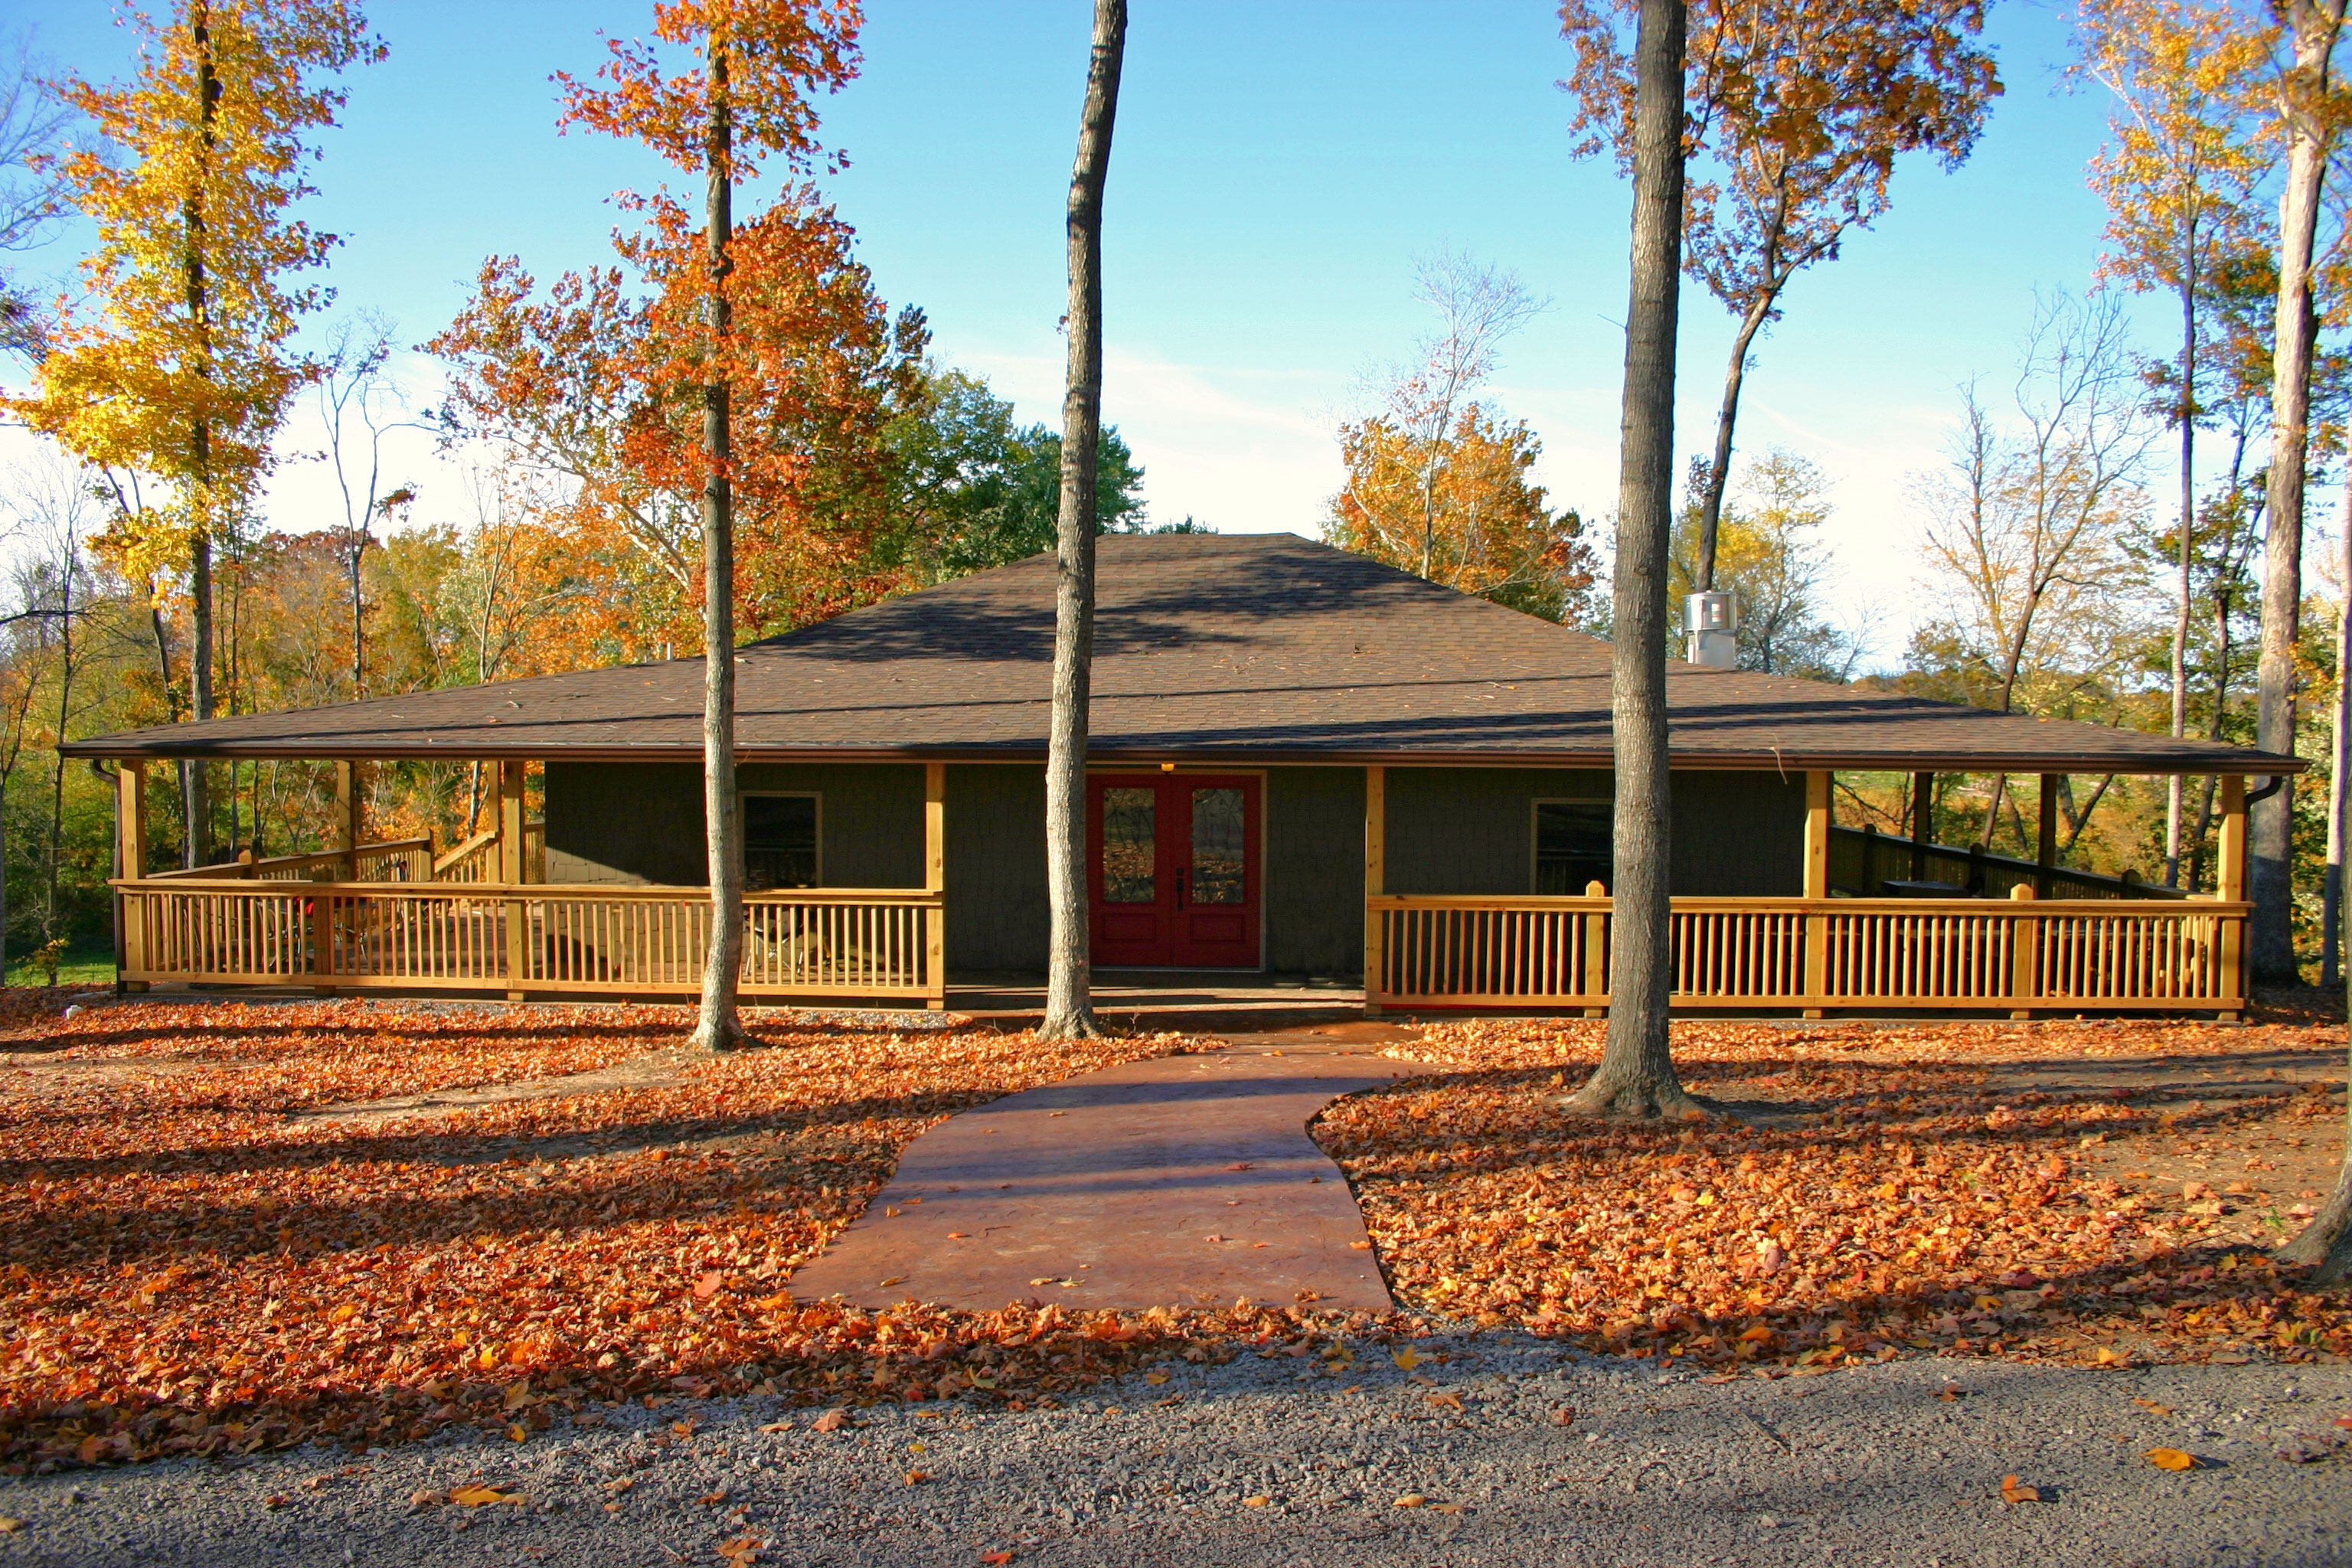 Apple Creek Vineyard & Winery - outdoor photo, daytime, of a large cabin with trees and a walkway surrounded by fallen leaves.